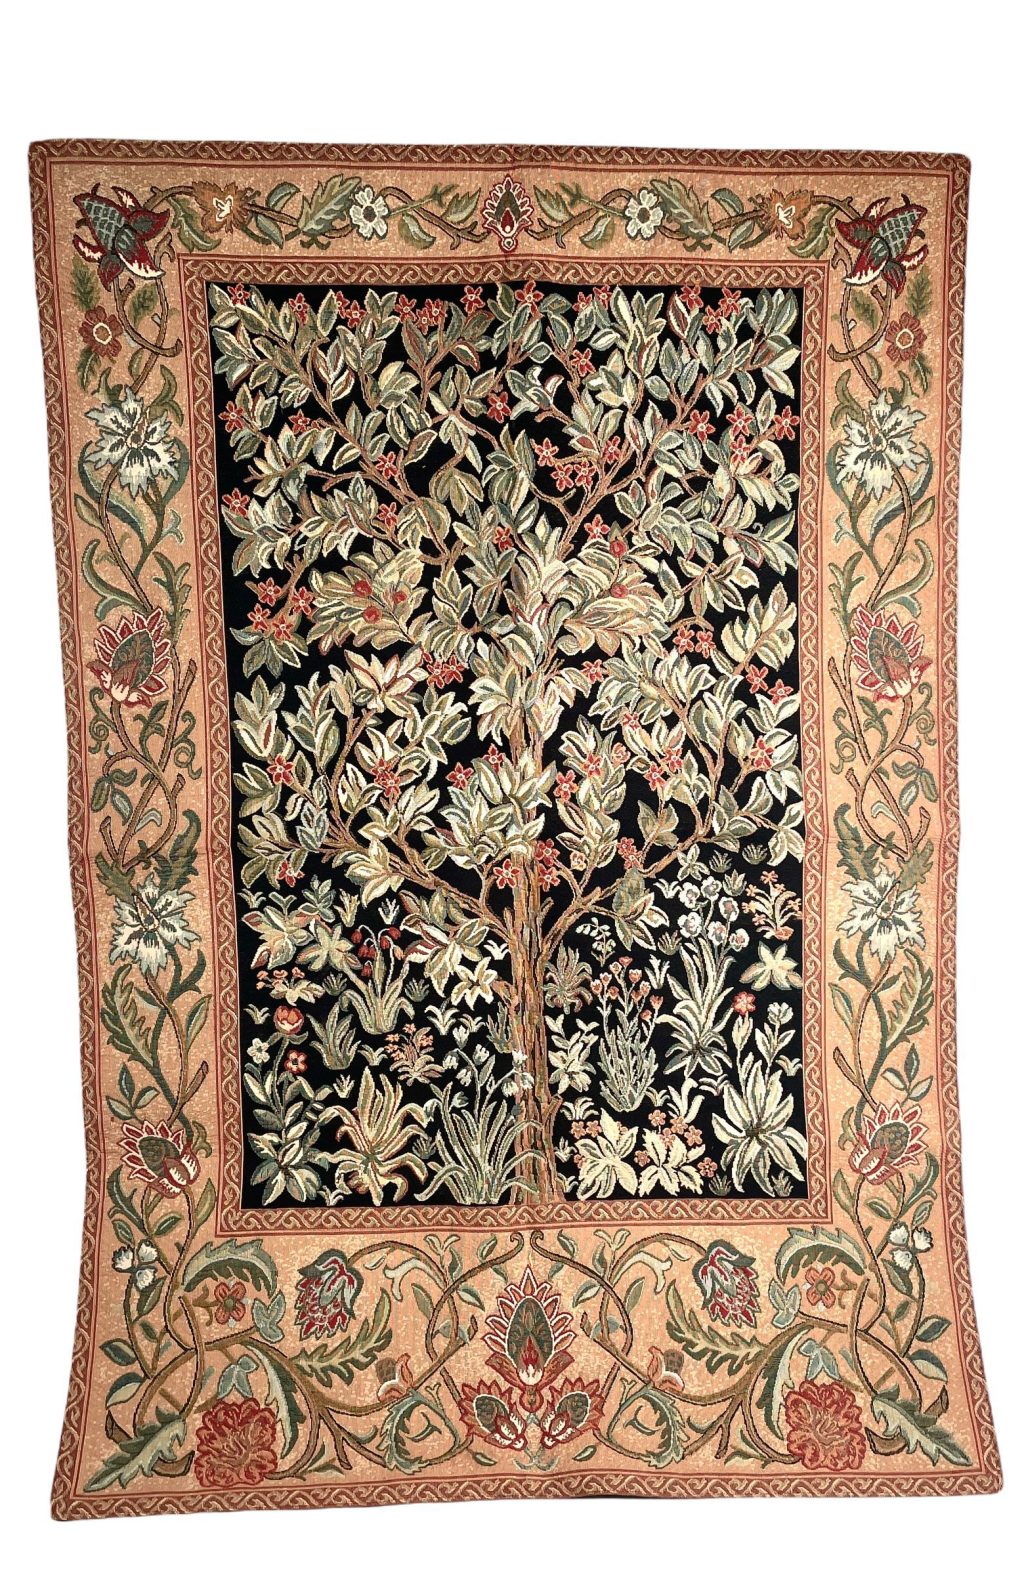 Vintage French Tapestry Tree Floral Black Wall Hanging Decor Decoration Display Château Tapisserie circa 1960-70’s / EVE